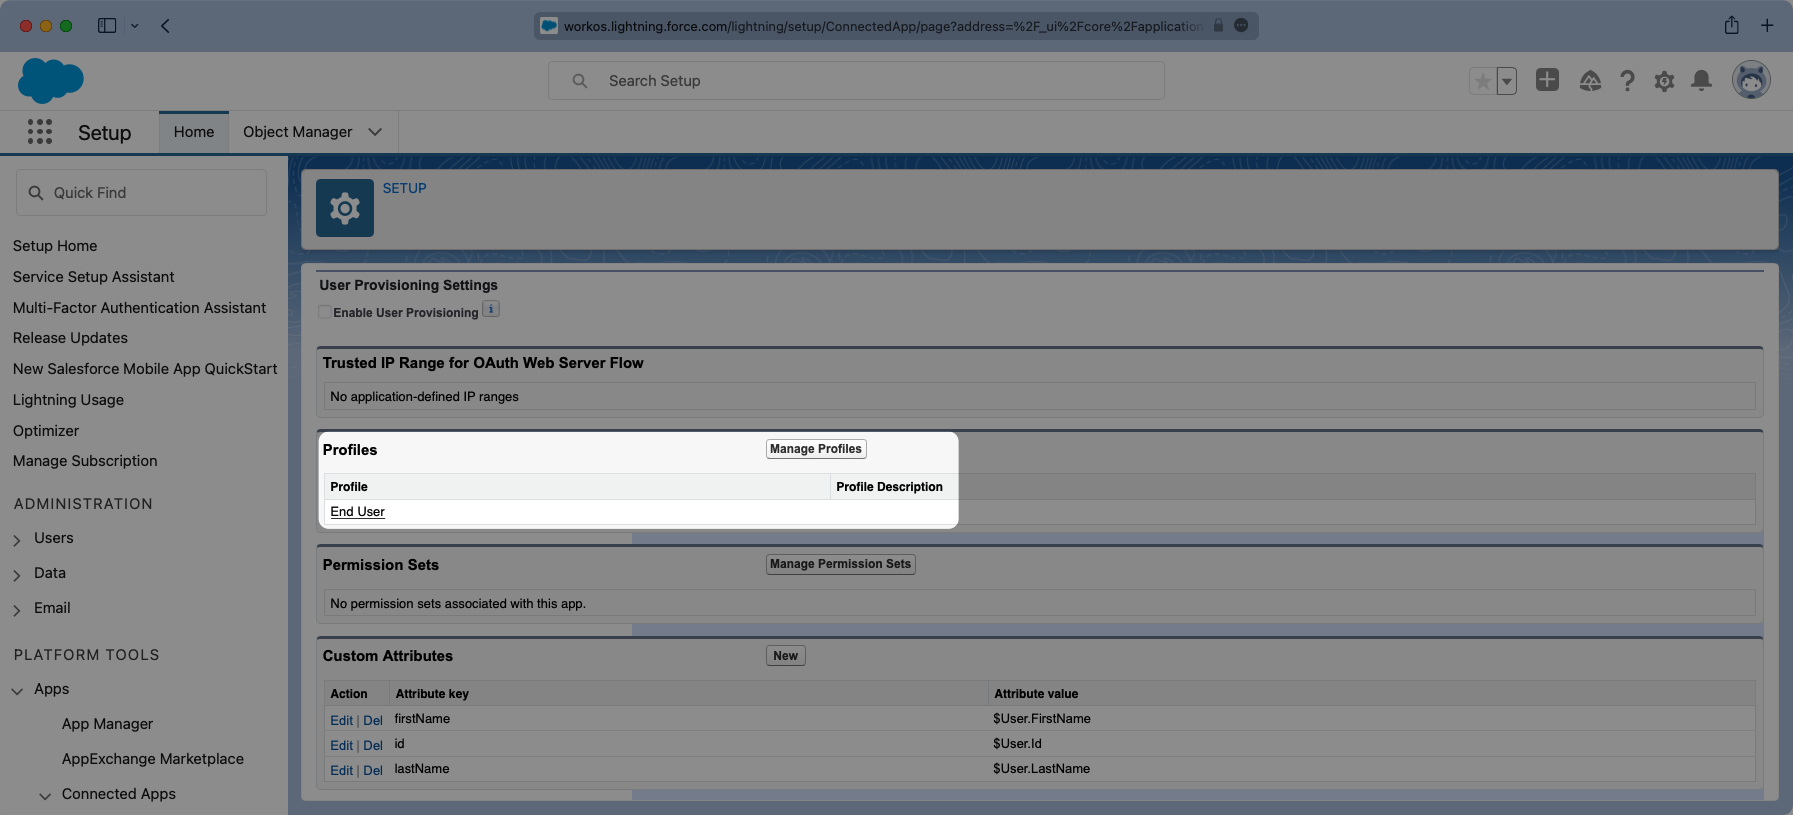 A screenshot showing the completed "Application Profile Assignments" in the Salesforce dashboard.